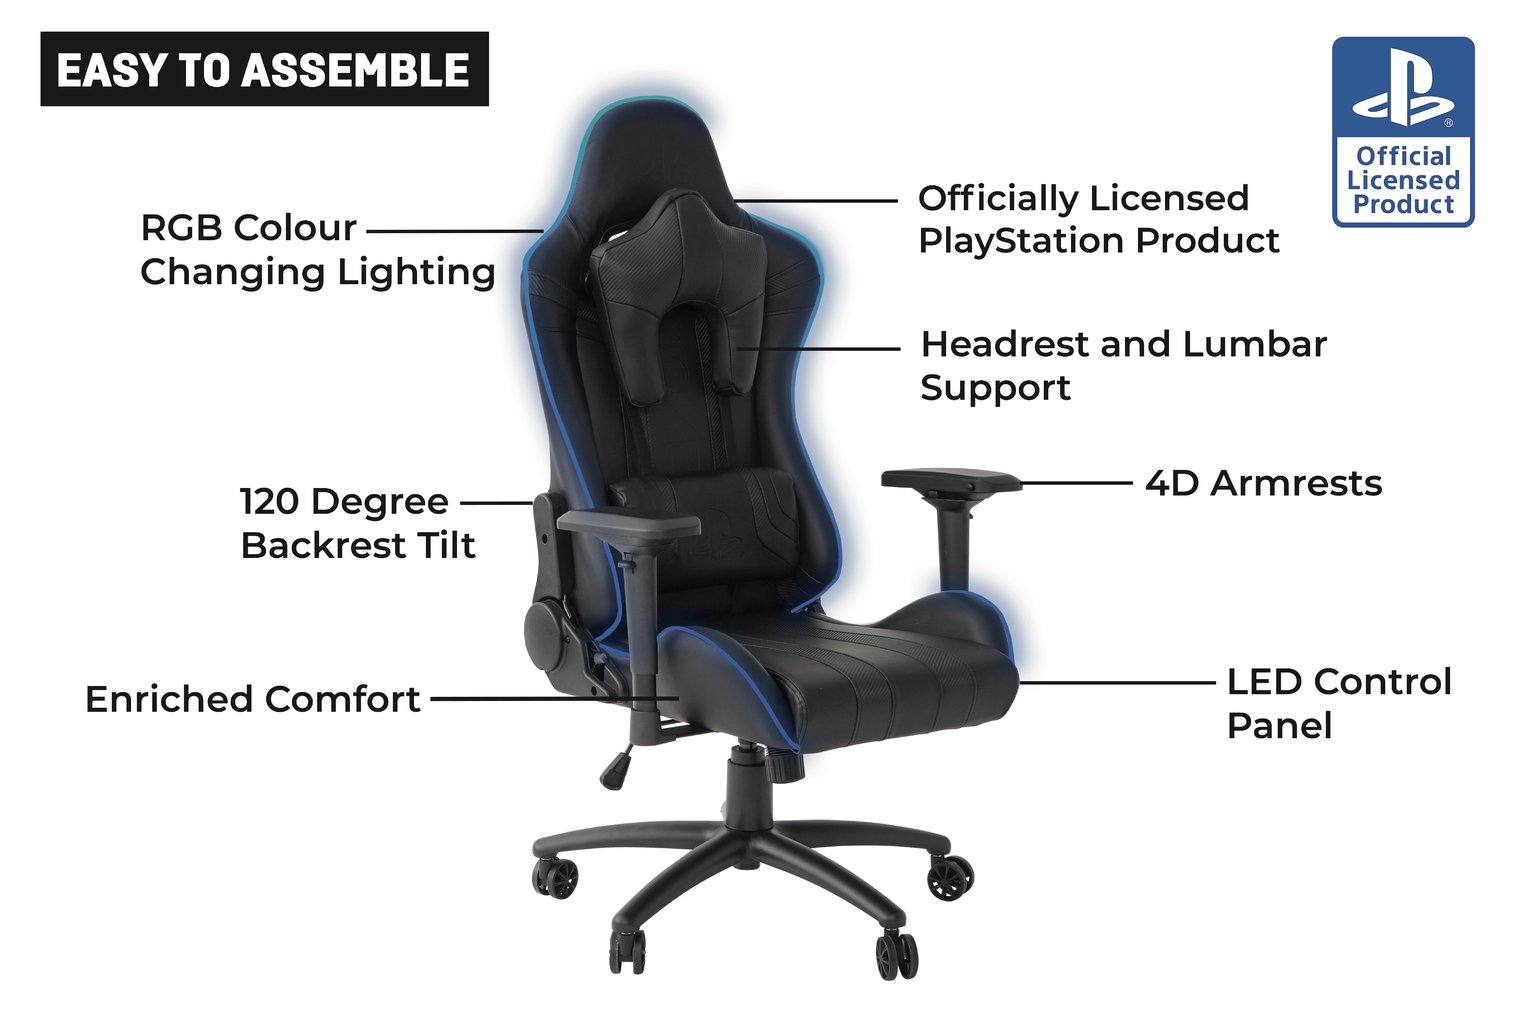 X-Rocker Amarok Official PlayStation LED Gaming Chair Review